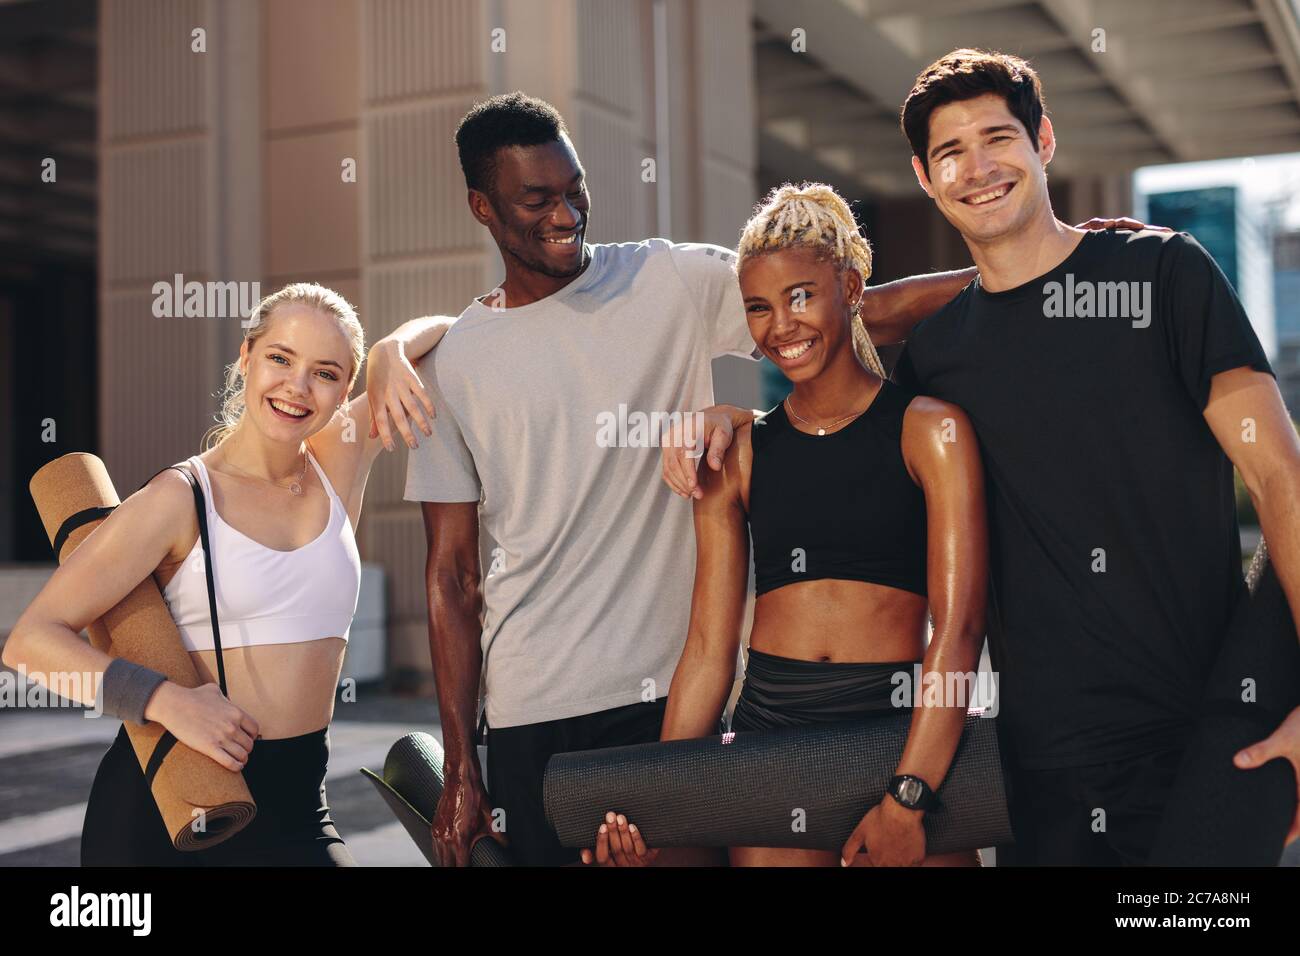 Multi-ethnic group of people standing together after exercising session outdoors. Men and women  in sportswear standing together looking at camera and Stock Photo